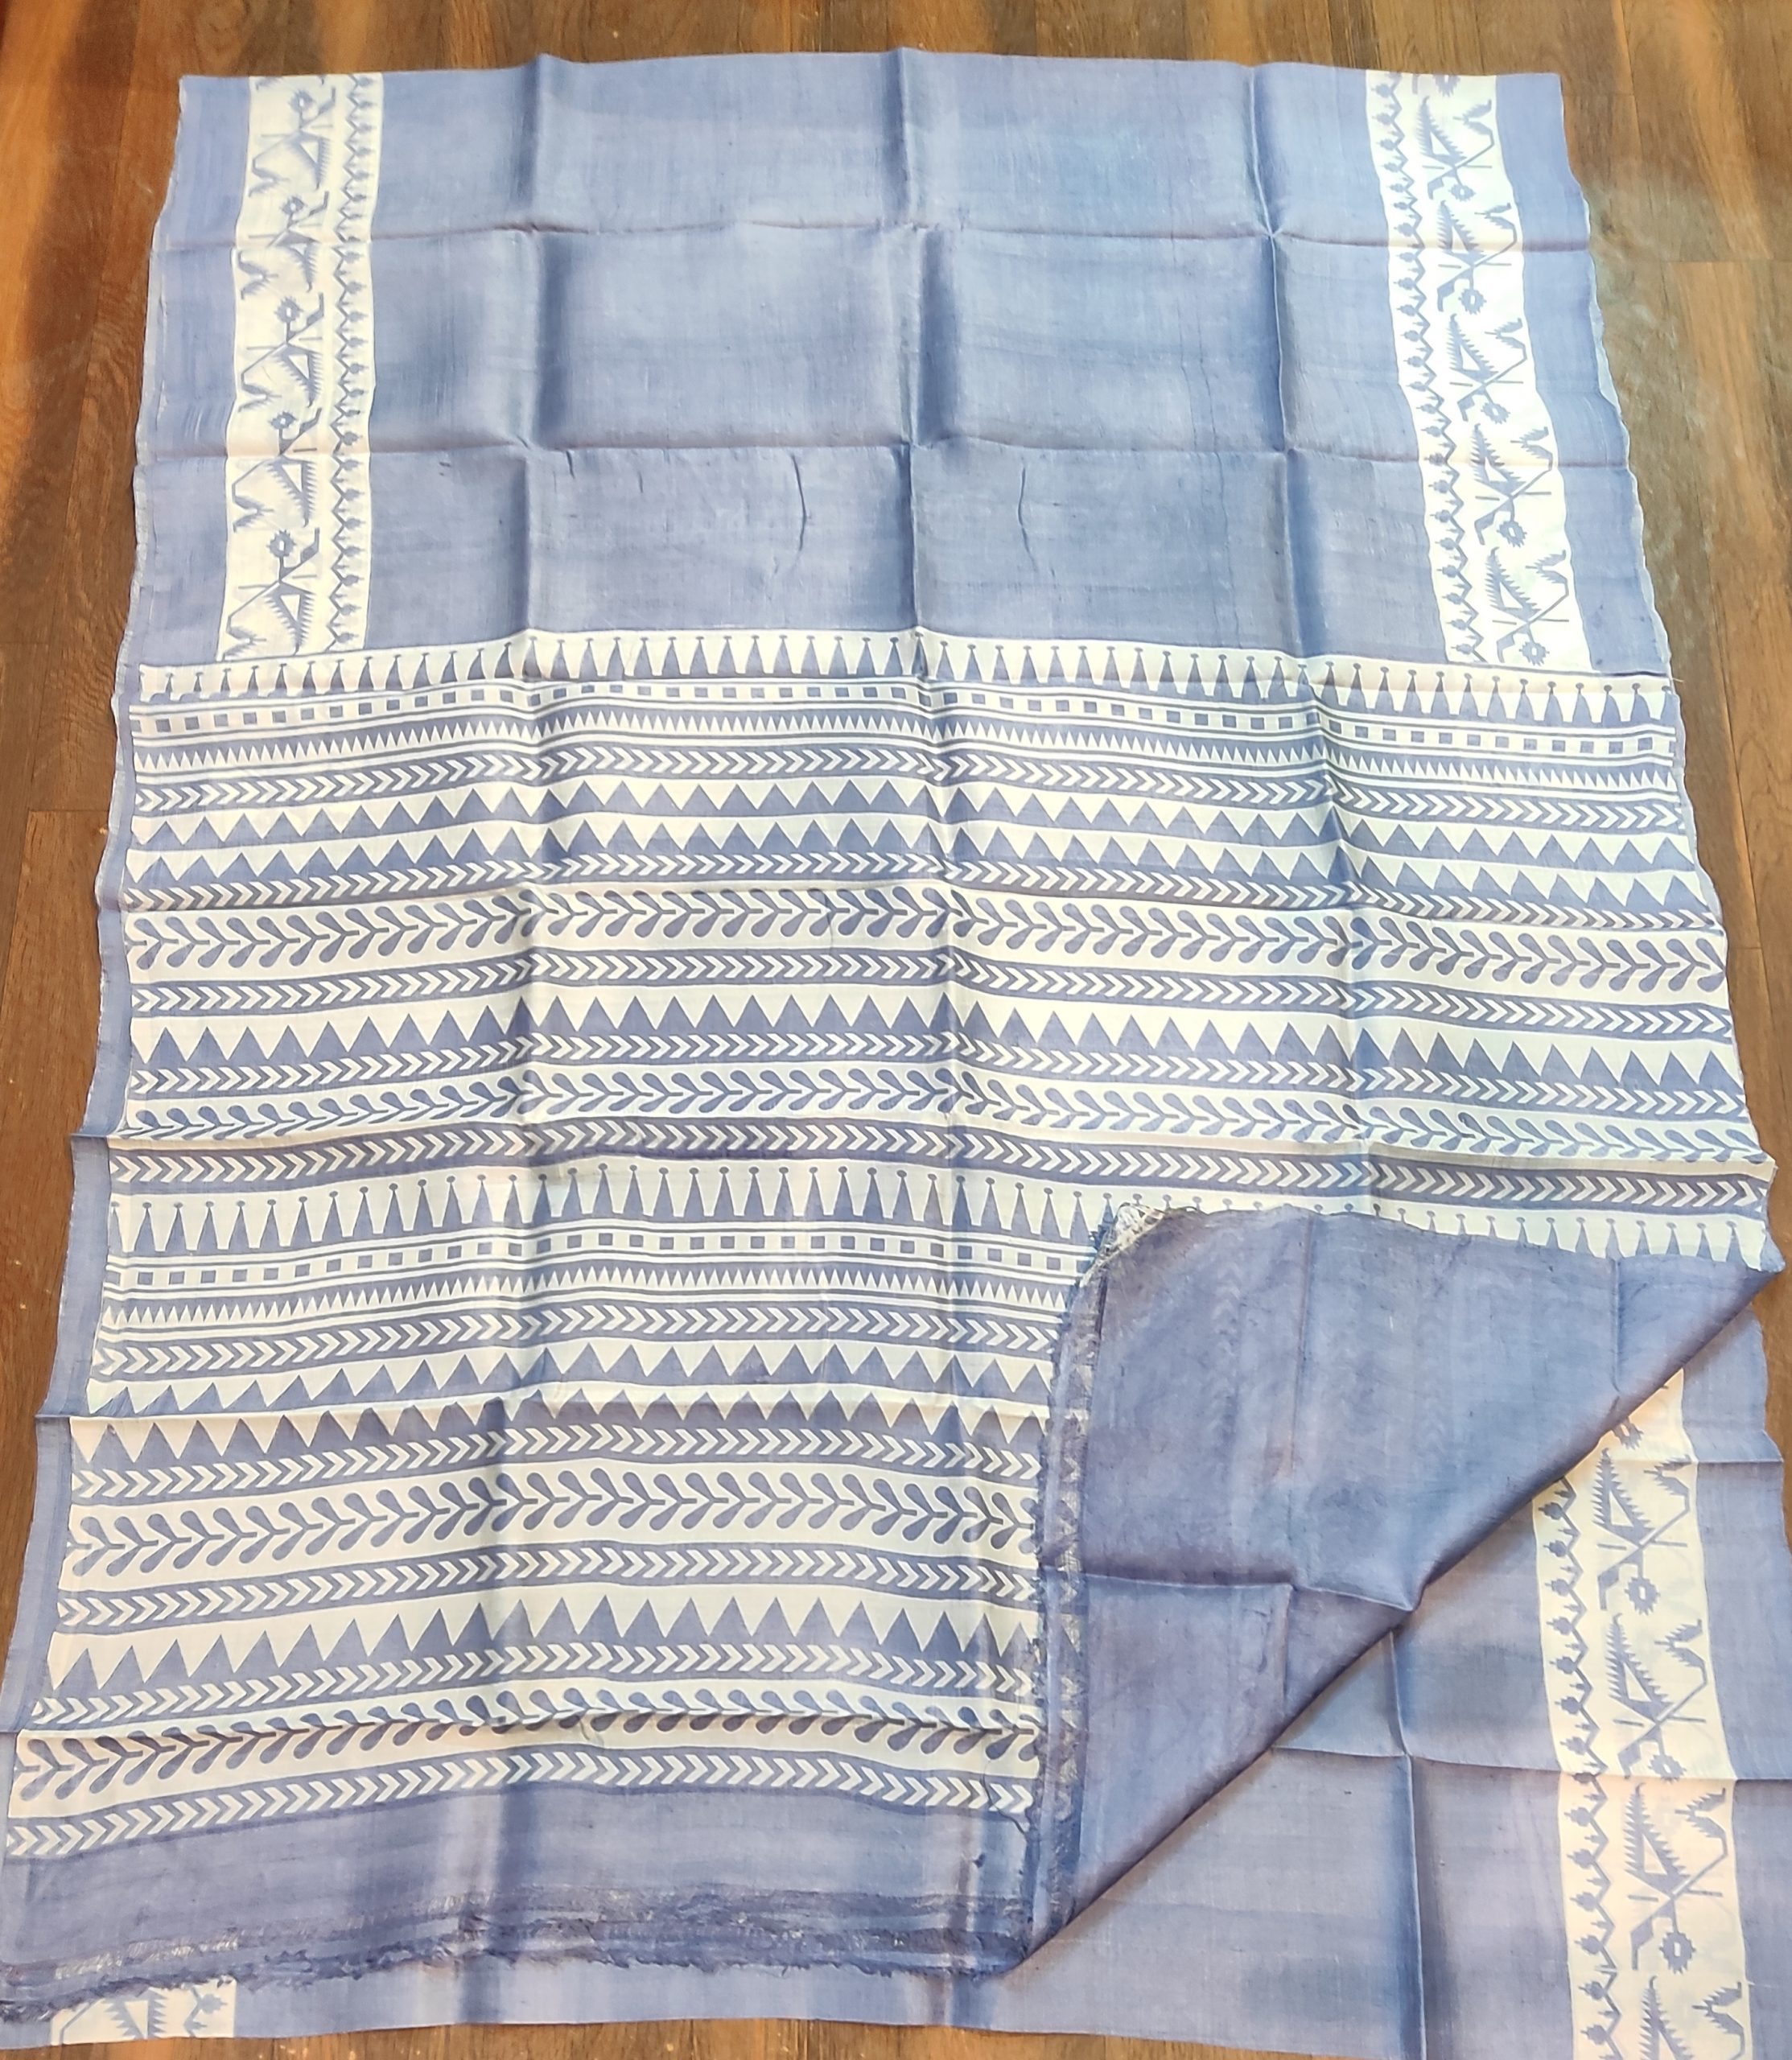 Pure Murshidaabad 3ply silk in steel grey colour with discharge block